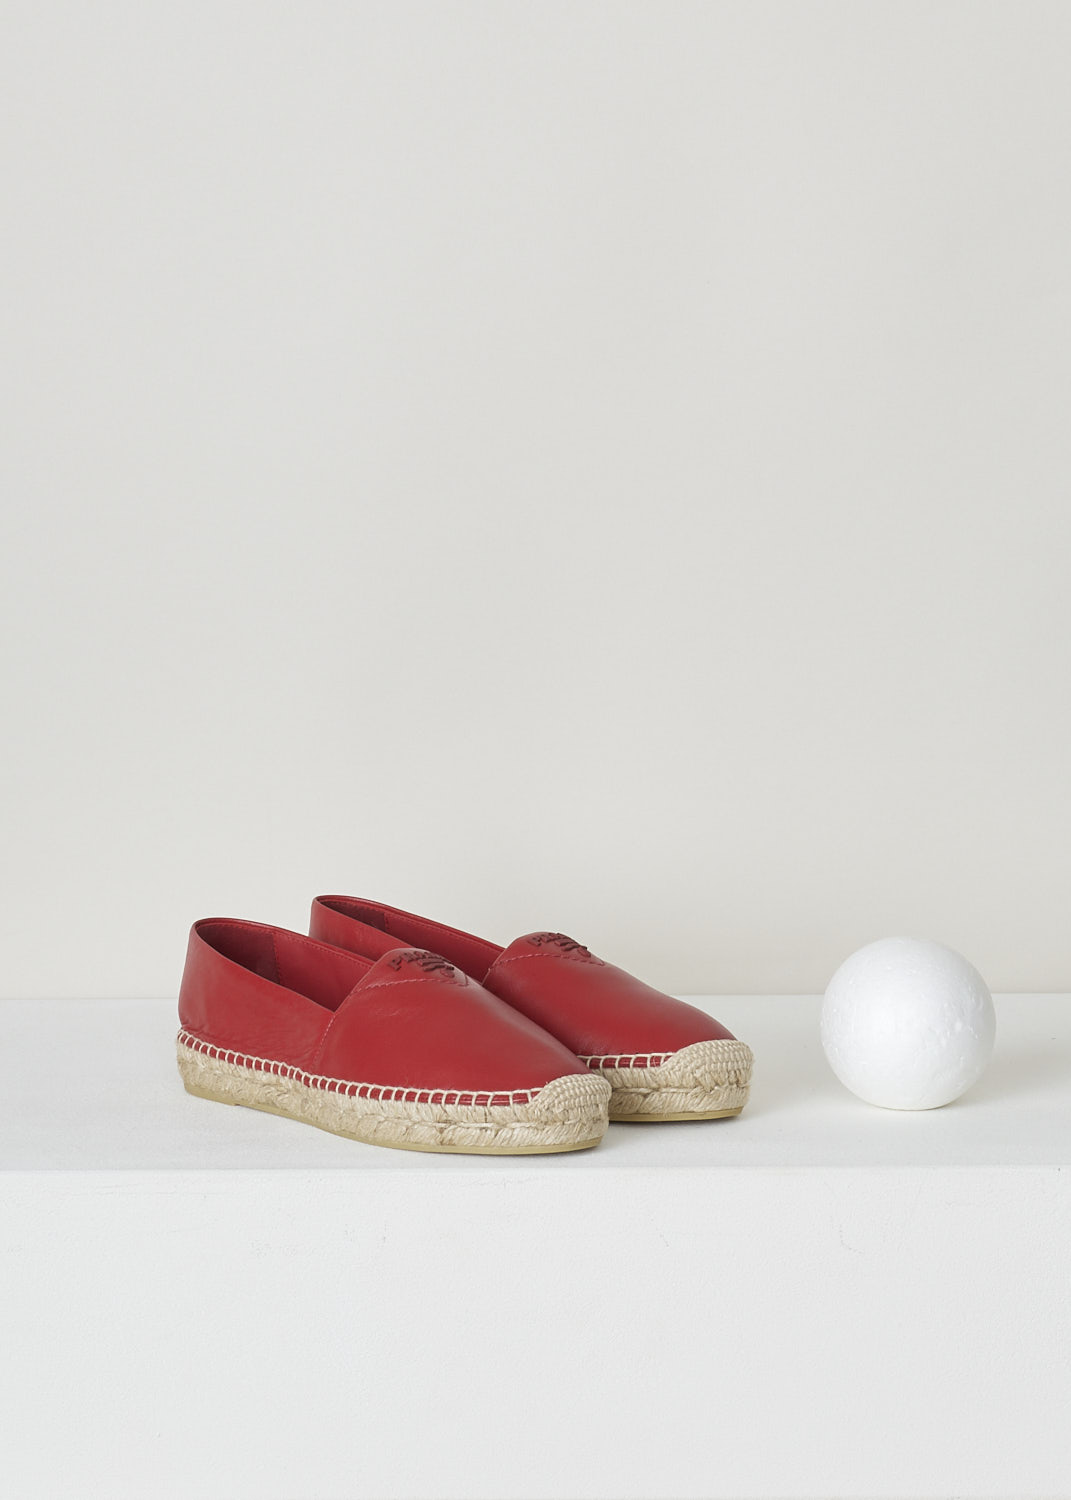 PRADA, RED LEATHER ESPADRILLES, NAPPA_1_1S871M_79N_F0011_ROSSO, Red, Front, These red, soft leather Espadrilles have a round toe that goes over into the braided jute soles. The brand's triangle logo can be found on the vamp in black.  
